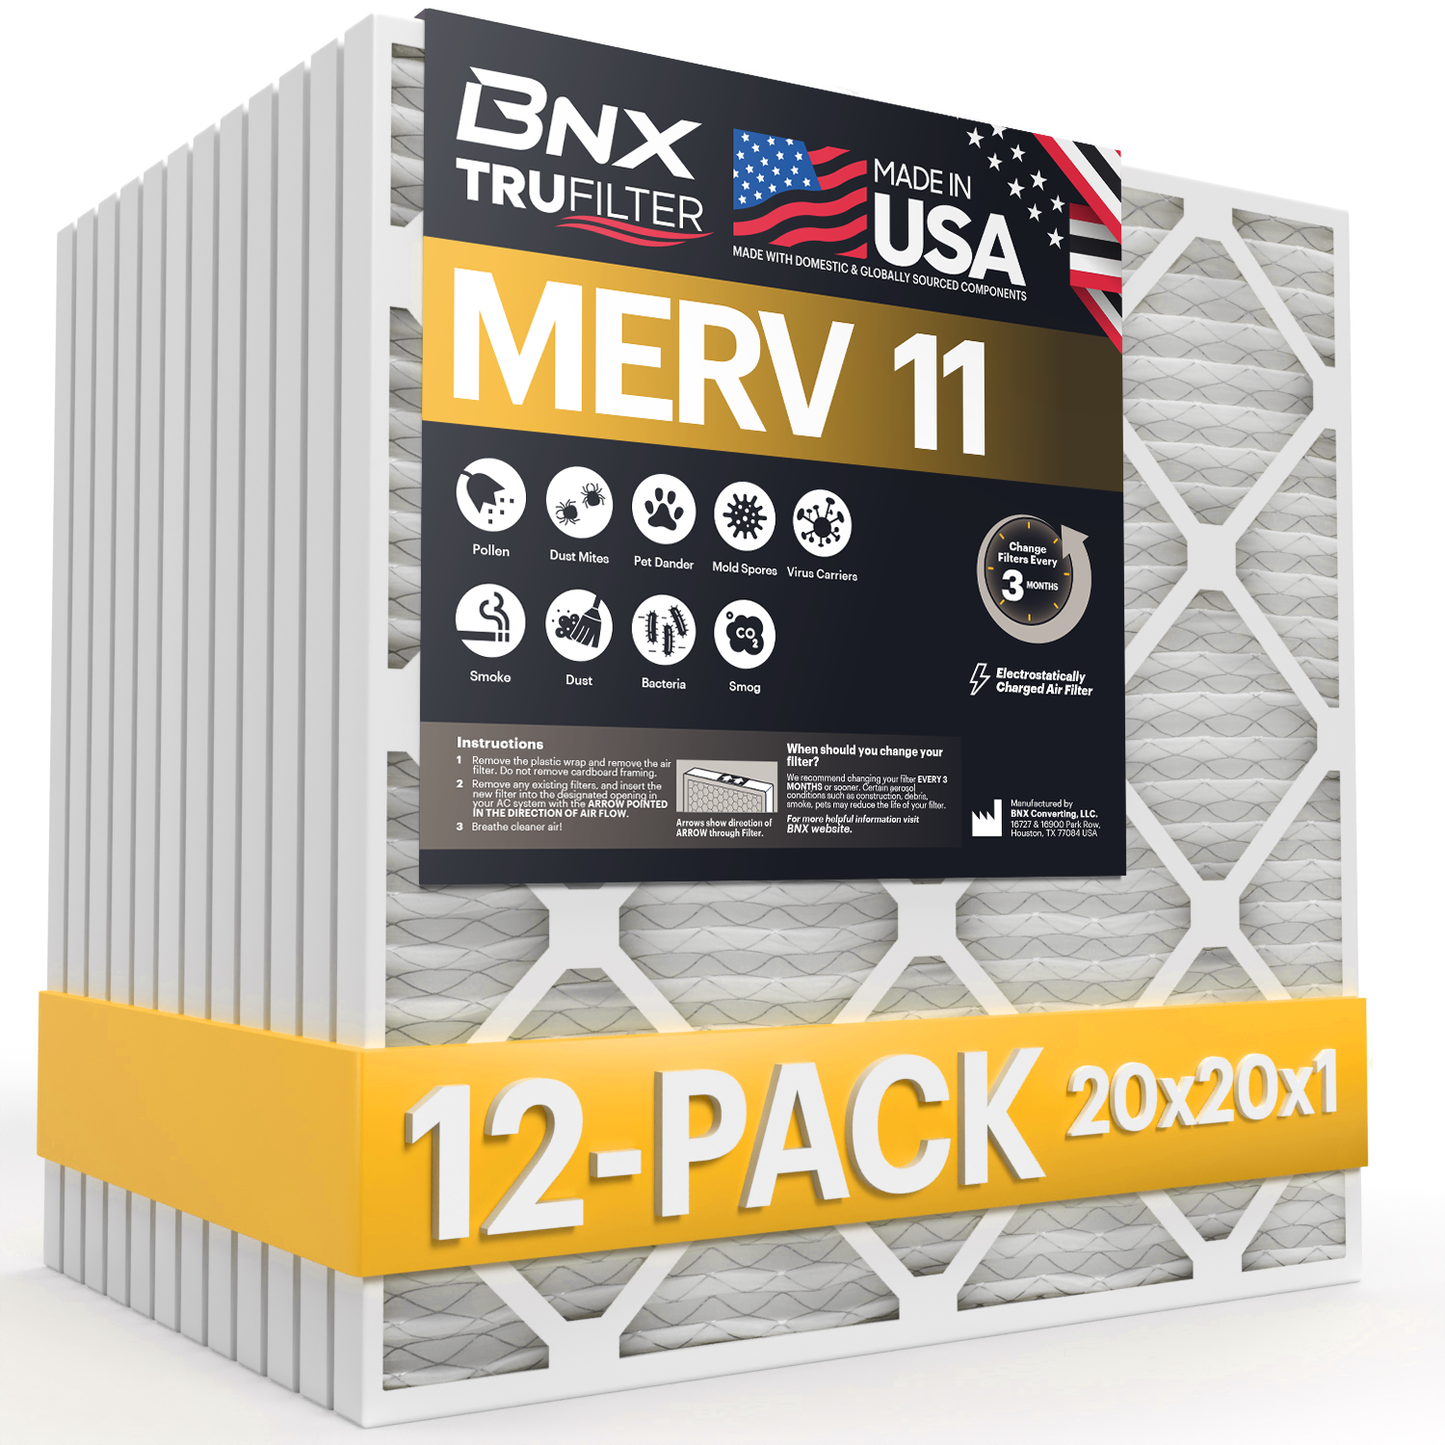 BNX TruFilter 20x20x1 Air Filter MERV 11 (12-Pack) - MADE IN USA - Allergen Defense Electrostatic Pleated Air Conditioner HVAC AC Furnace Filters for Allergies, Dust, Pet, Smoke, Allergy MPR 1200 FPR 7